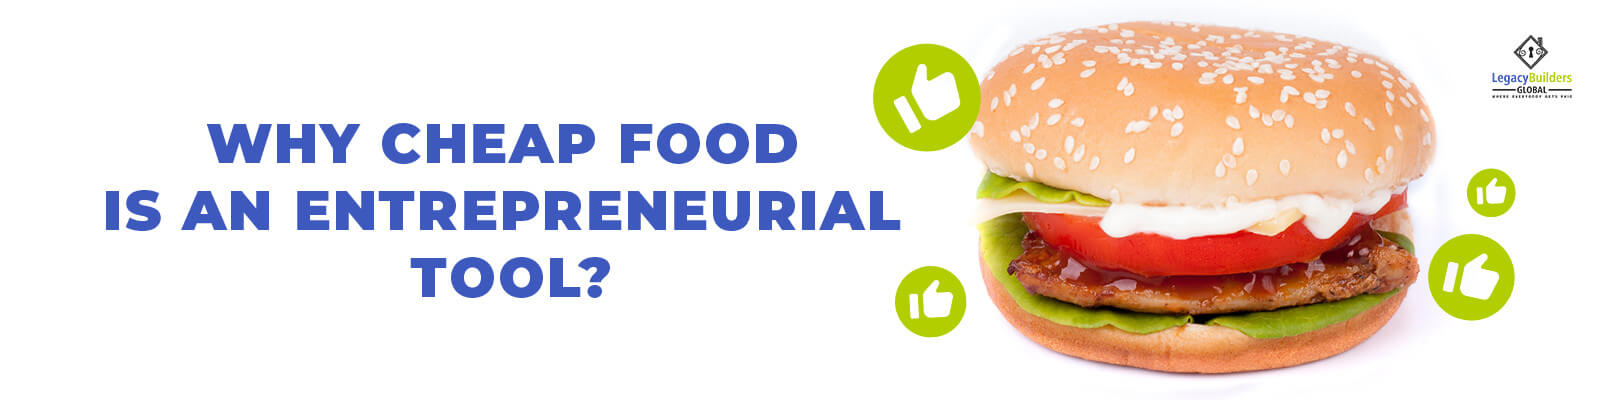 Why cheap food is an entrepreneurial tool?